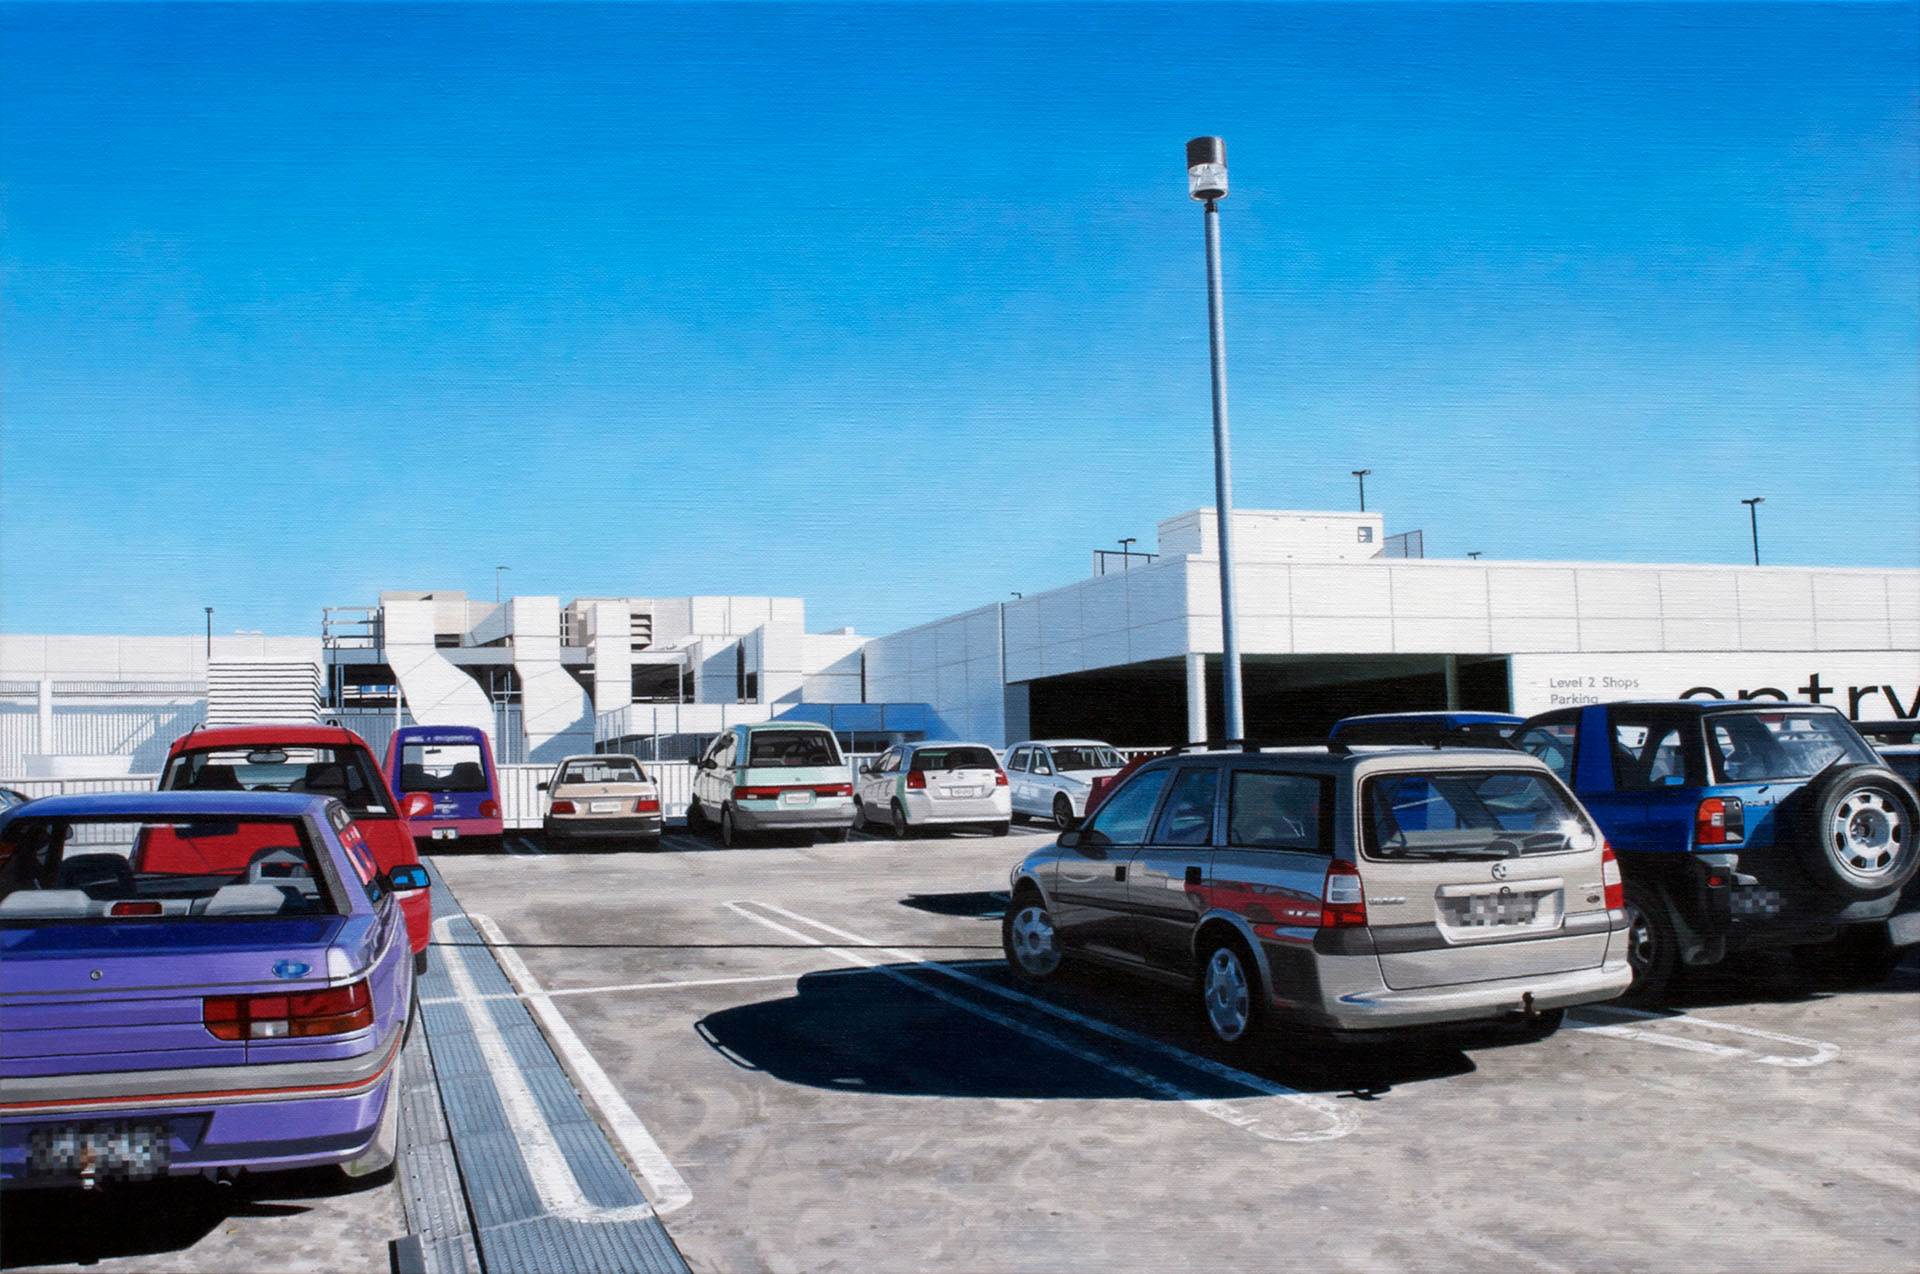  Car Park, 2008, acrylic on linen, 560 x 835mm, Team McMillan BMW Art Award 2010, private collection 